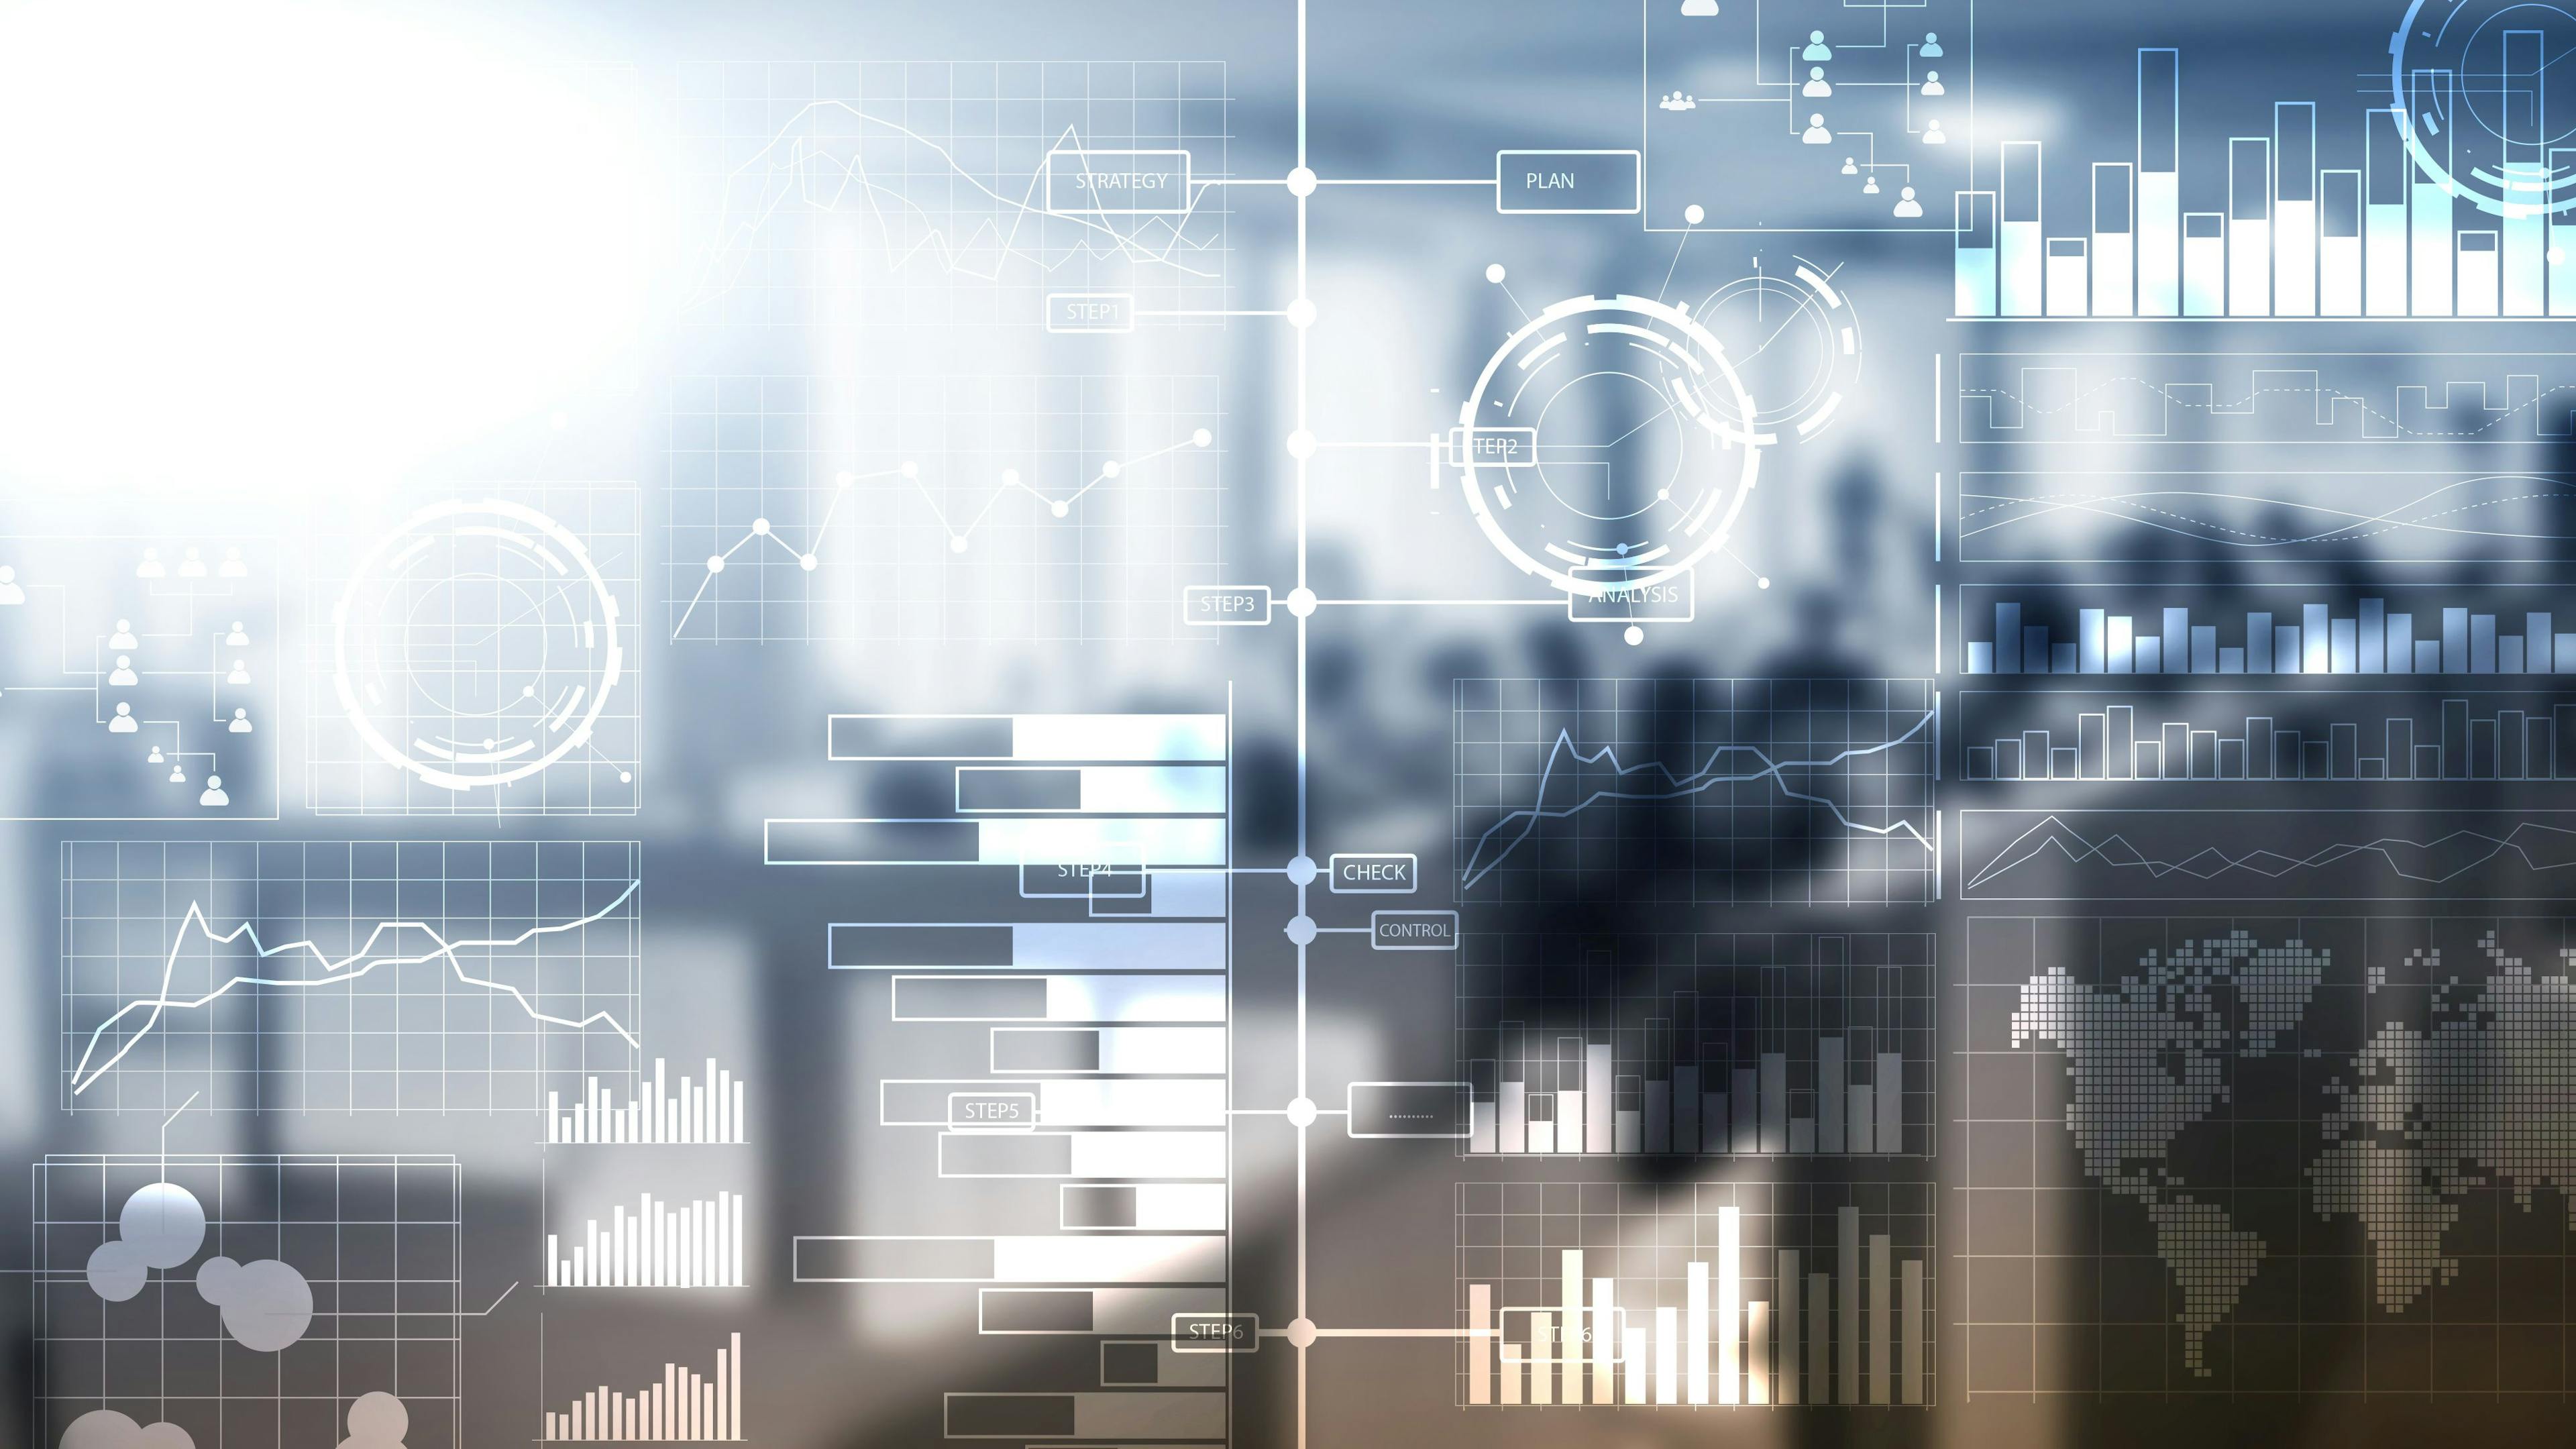 Business intelligence. Diagram,Graph, Stock Trading, Investment dashboard, transparent blurred background | Image Credit: © Funtap – stock.adobe.com